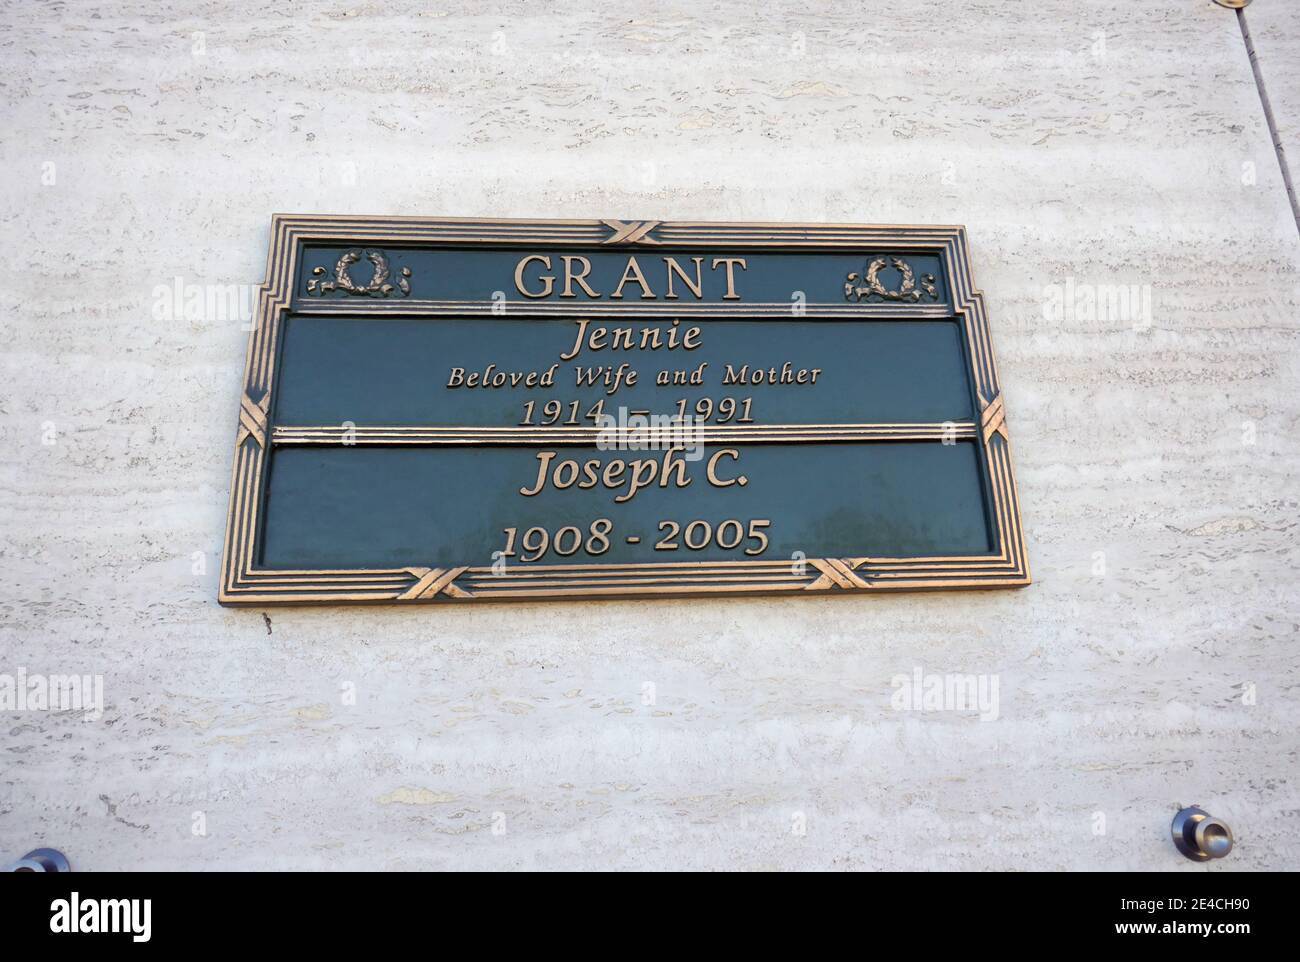 Glendale, California, USA 18th January 2021 A general view of atmosphere of artist Joe Grant's Grave at Forest Lawn Memorial Park on January 18, 2021 in Glendale, California, USA. Photo by Barry King/Alamy Stock Photo Stock Photo